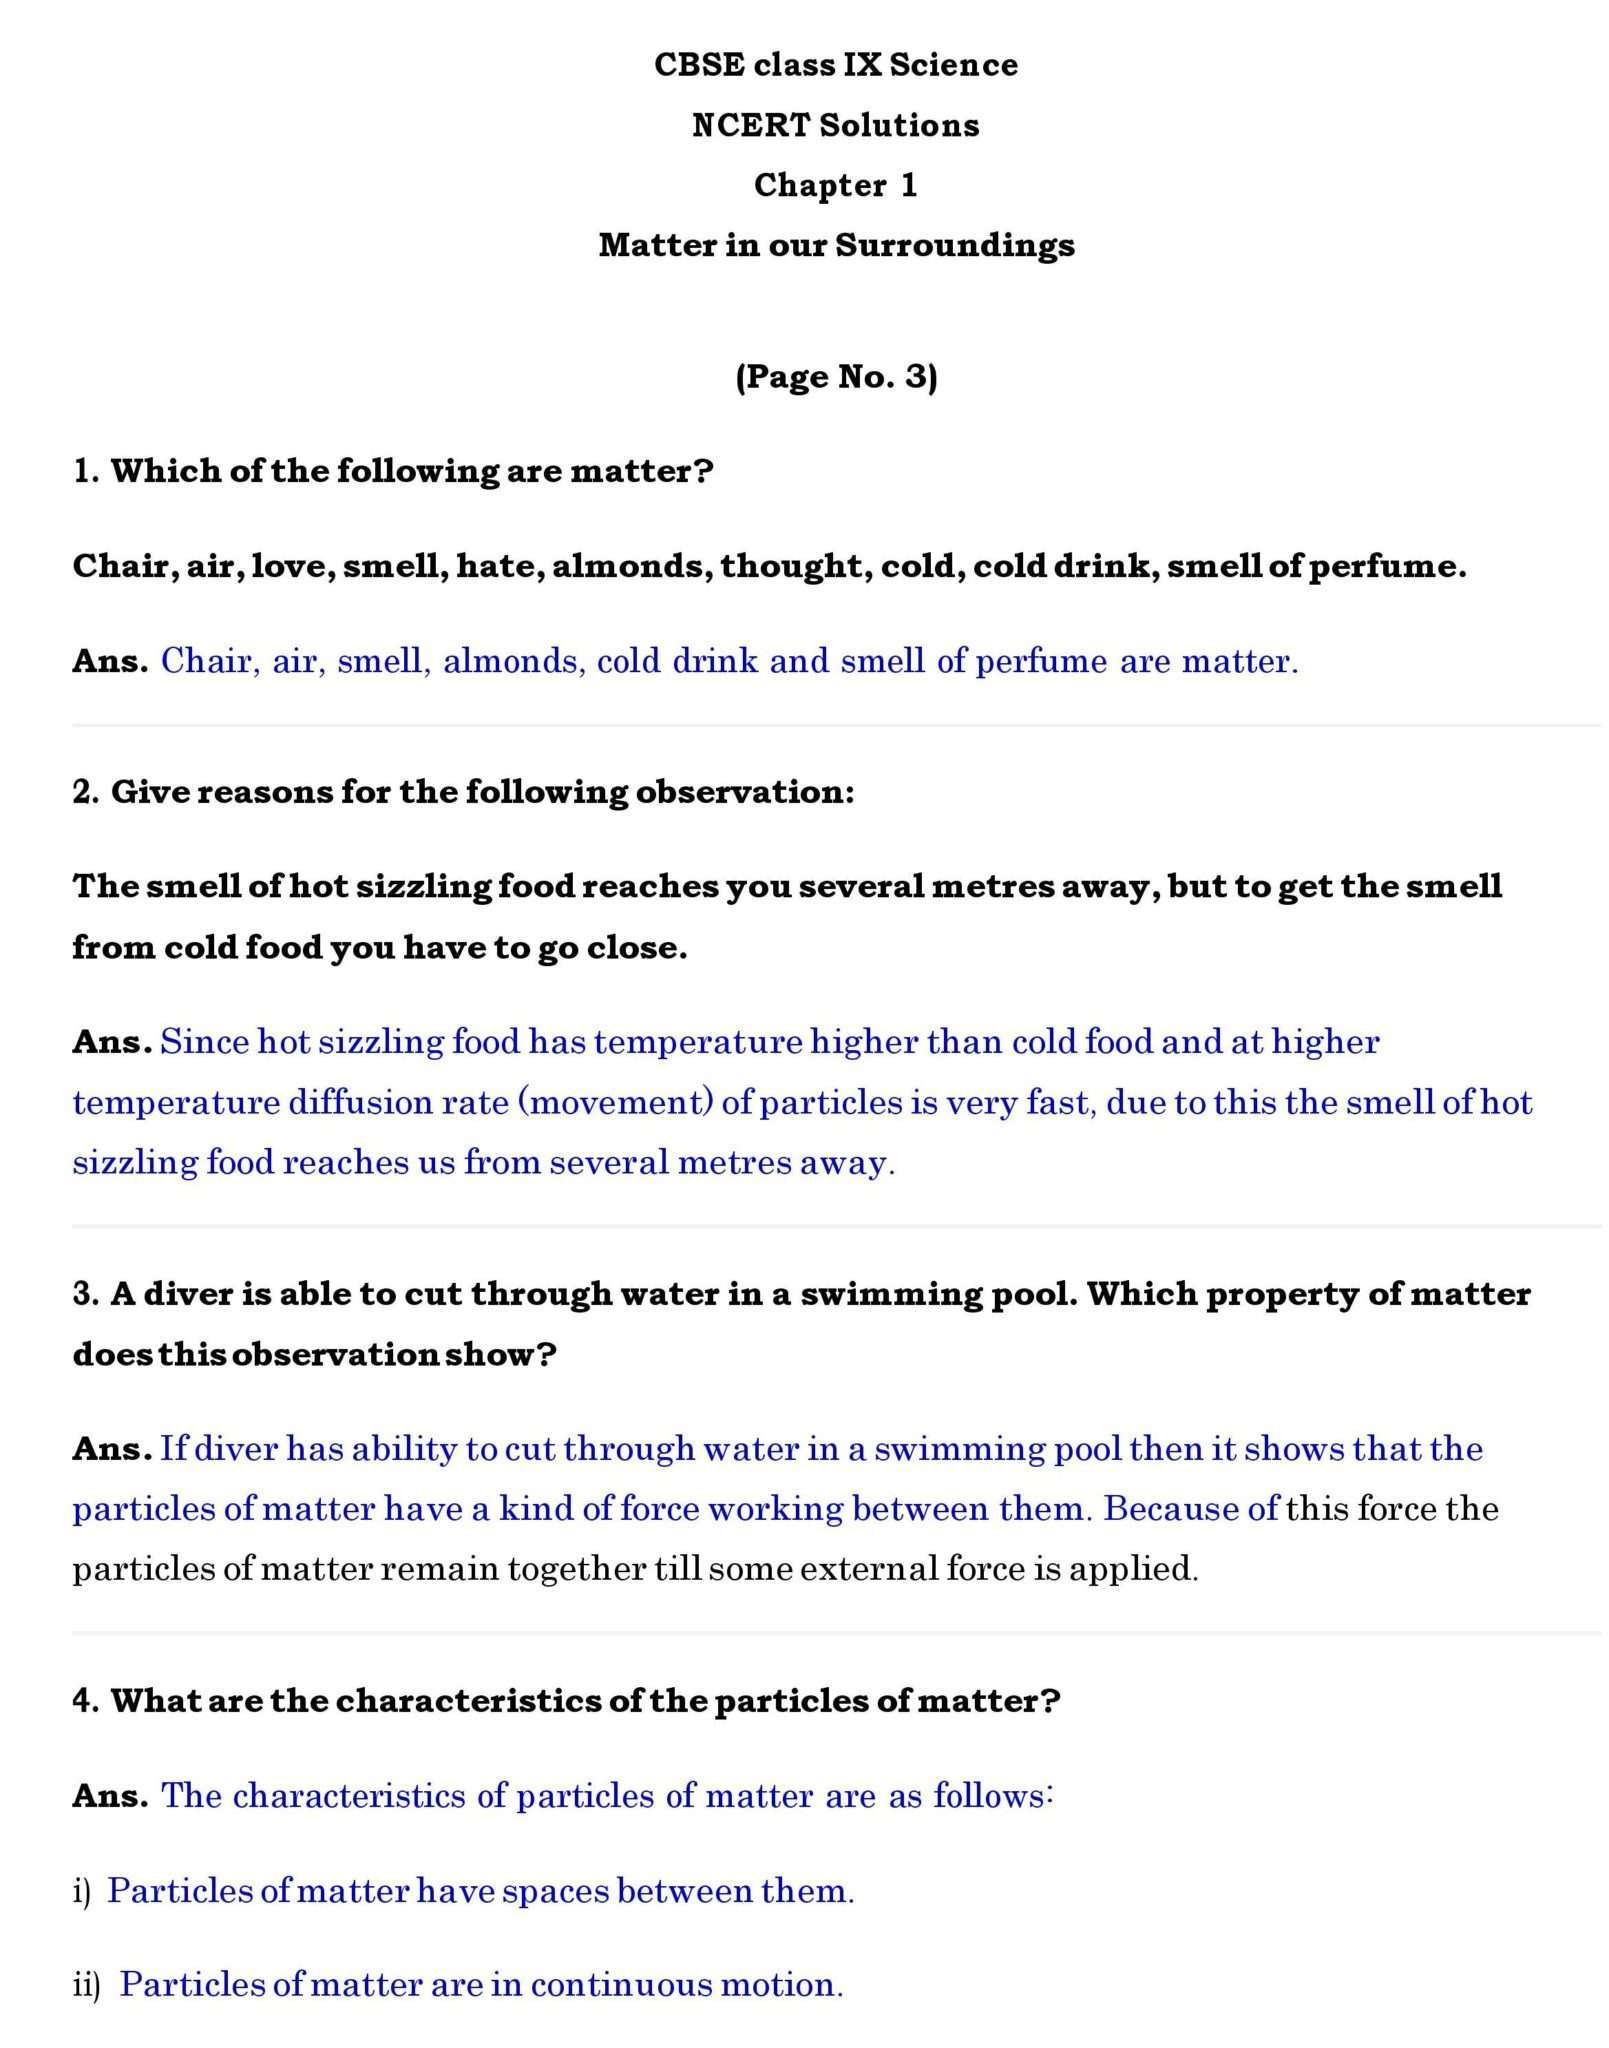 Ch 1 Science Matter in our Surroundings page 001